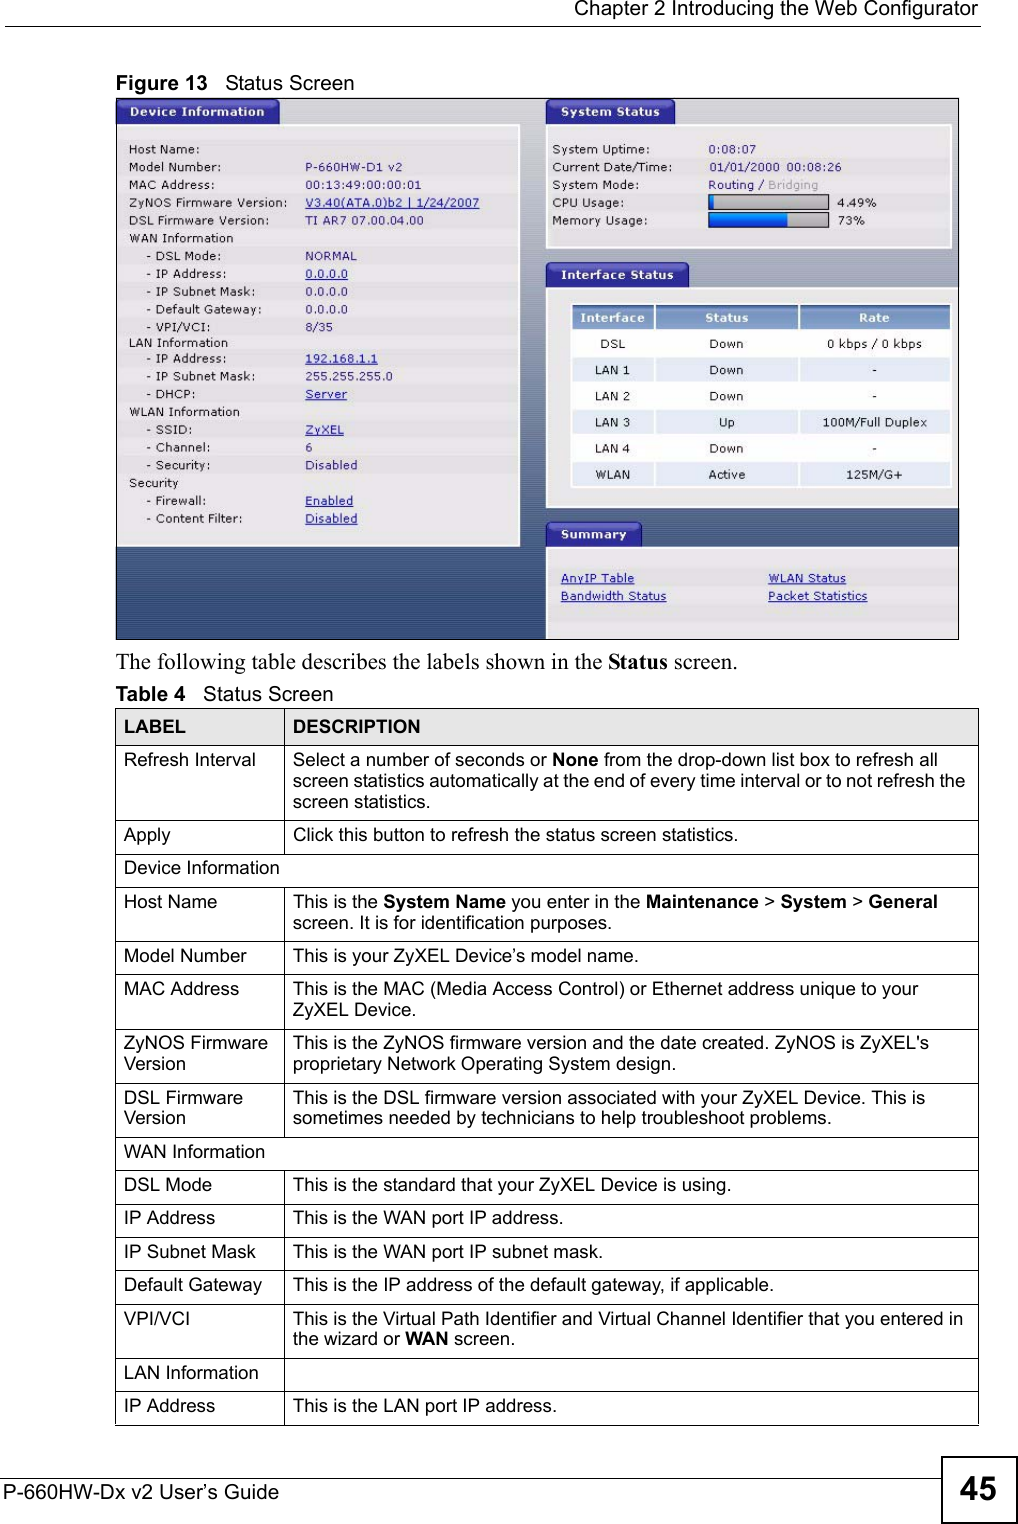  Chapter 2 Introducing the Web ConfiguratorP-660HW-Dx v2 User’s Guide 45Figure 13   Status ScreenThe following table describes the labels shown in the Status screen.Table 4   Status ScreenLABEL DESCRIPTIONRefresh Interval Select a number of seconds or None from the drop-down list box to refresh all screen statistics automatically at the end of every time interval or to not refresh the screen statistics.Apply Click this button to refresh the status screen statistics.Device InformationHost Name This is the System Name you enter in the Maintenance &gt; System &gt; General screen. It is for identification purposes.Model Number This is your ZyXEL Device’s model name.MAC Address This is the MAC (Media Access Control) or Ethernet address unique to your ZyXEL Device.ZyNOS Firmware VersionThis is the ZyNOS firmware version and the date created. ZyNOS is ZyXEL&apos;s proprietary Network Operating System design.DSL Firmware VersionThis is the DSL firmware version associated with your ZyXEL Device. This is sometimes needed by technicians to help troubleshoot problems.WAN Information DSL Mode This is the standard that your ZyXEL Device is using.IP Address This is the WAN port IP address. IP Subnet Mask This is the WAN port IP subnet mask. Default Gateway This is the IP address of the default gateway, if applicable. VPI/VCI This is the Virtual Path Identifier and Virtual Channel Identifier that you entered in the wizard or WAN screen.LAN InformationIP Address This is the LAN port IP address.